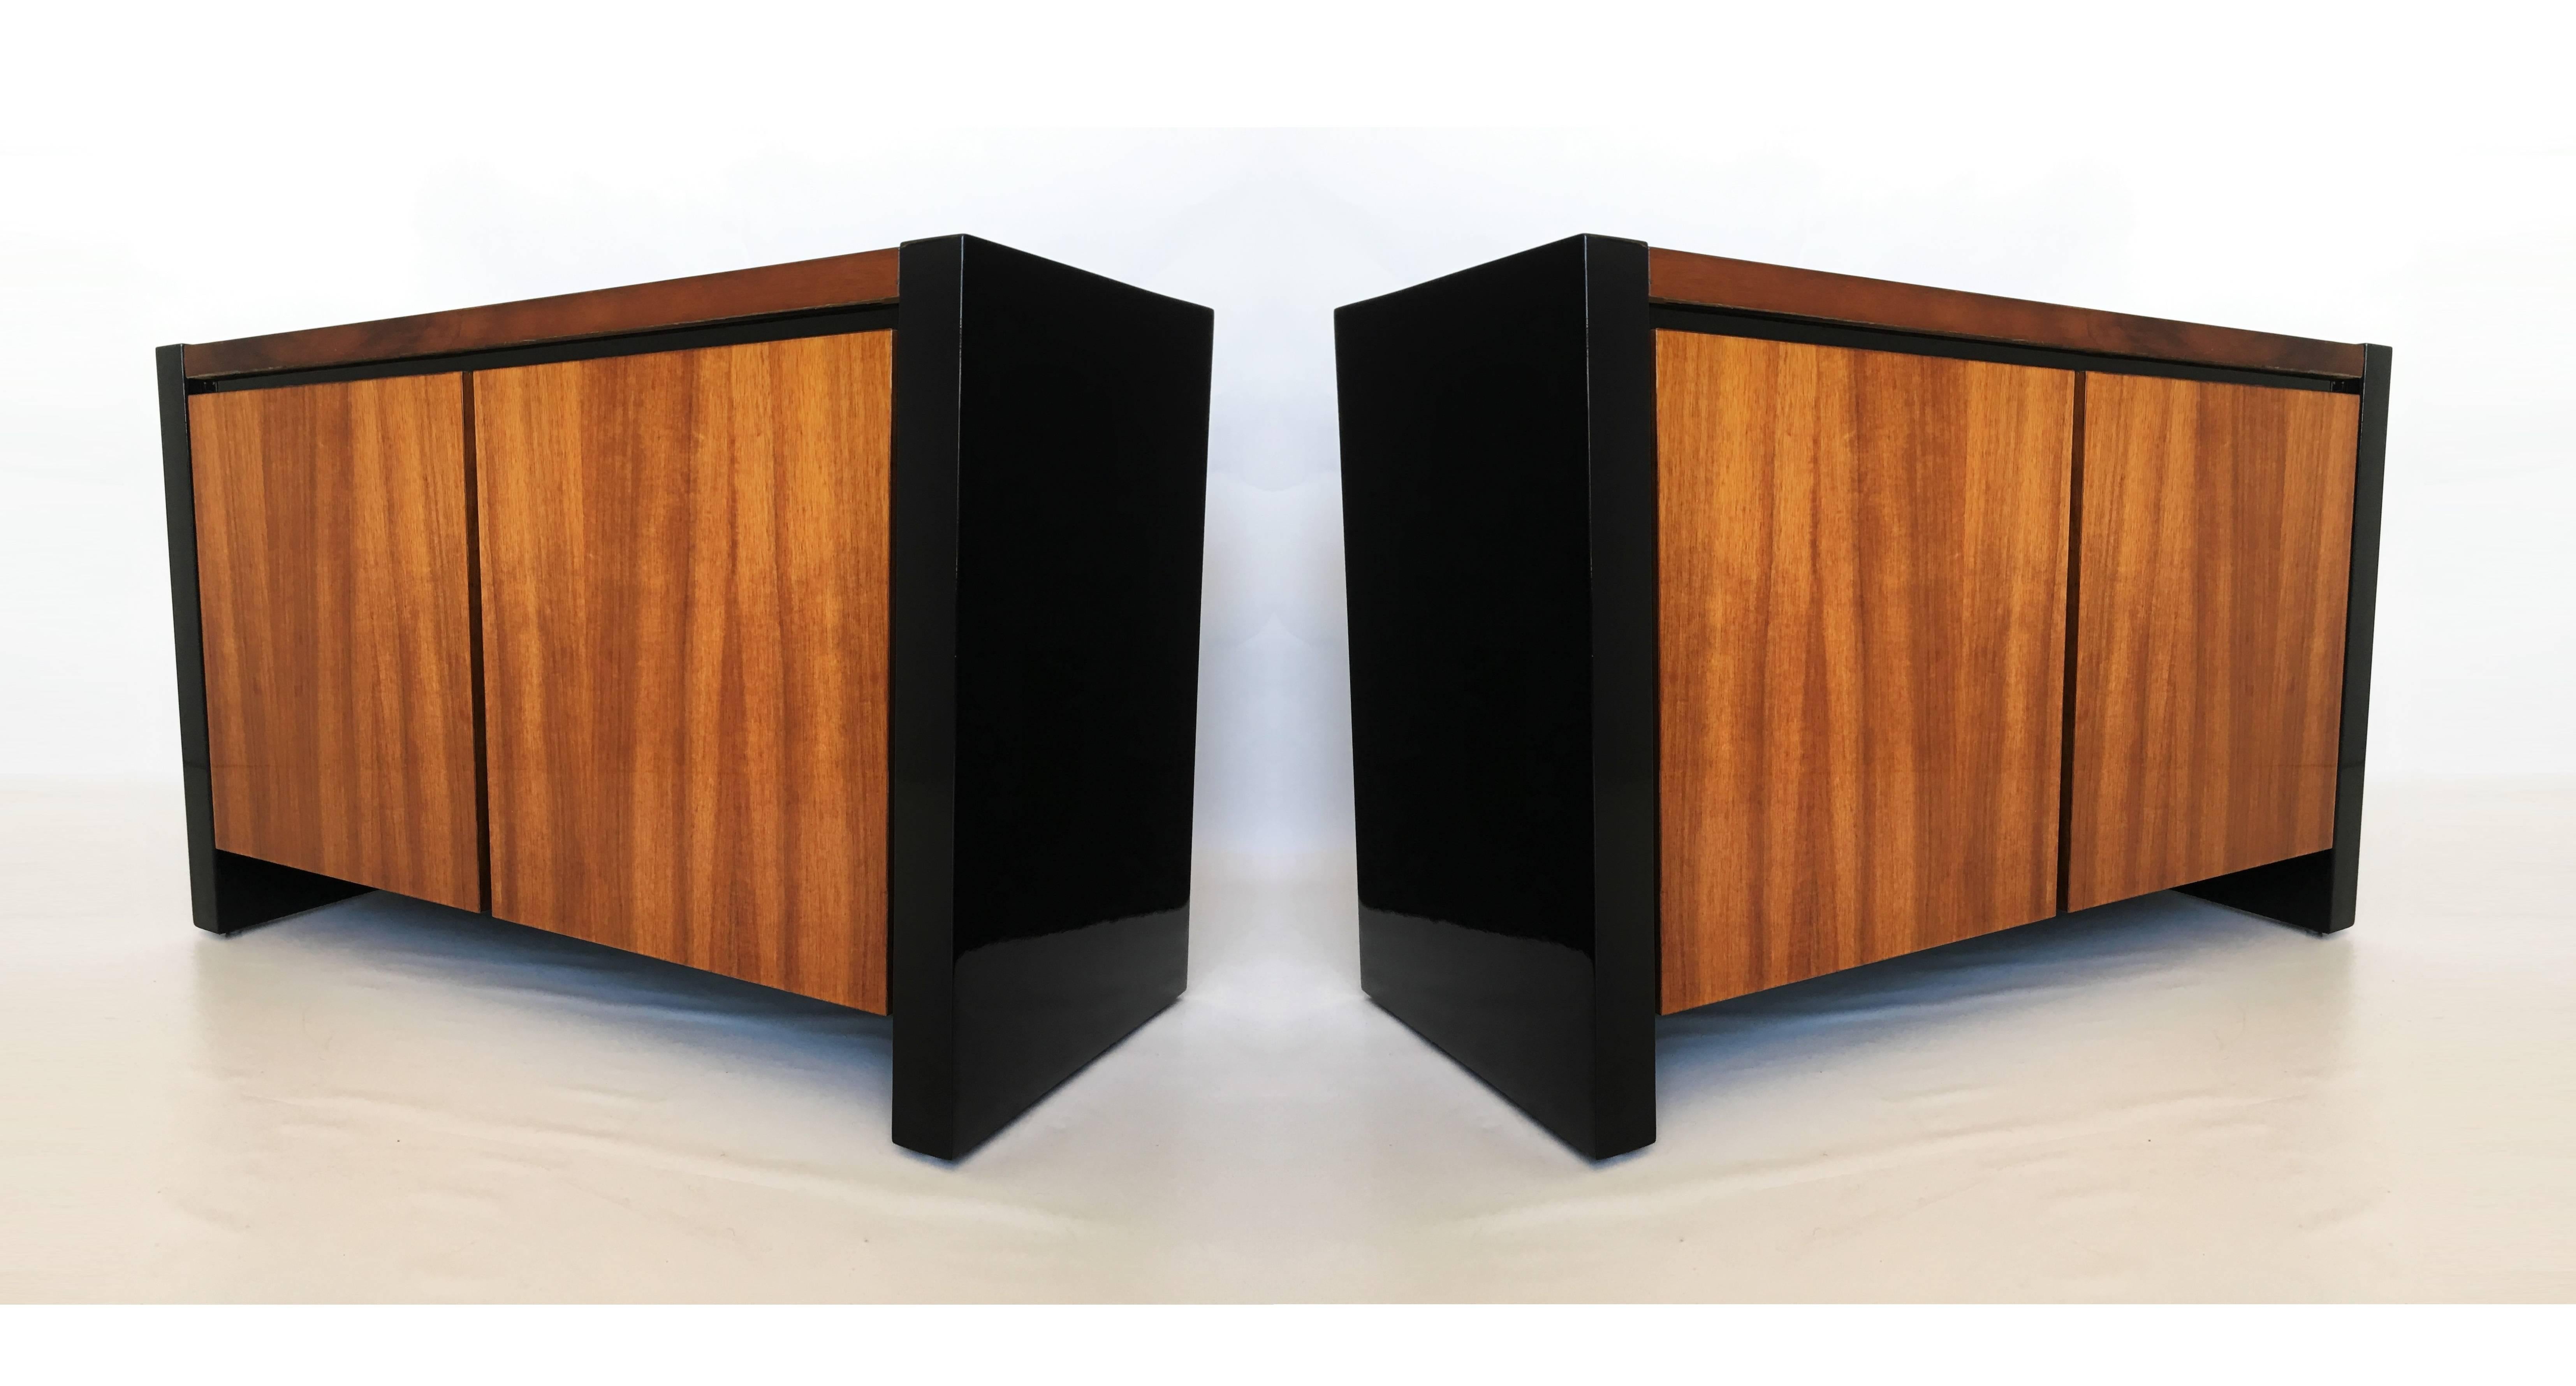 Set of two absolutely stunning nightstands by Henredon. Clean, contemporary, sophisticated. Each piece crafted with maple solids and rare Koa Veneer with a Kahala and black lacquer, high gloss finish. The koa wood is really striking, particularly as